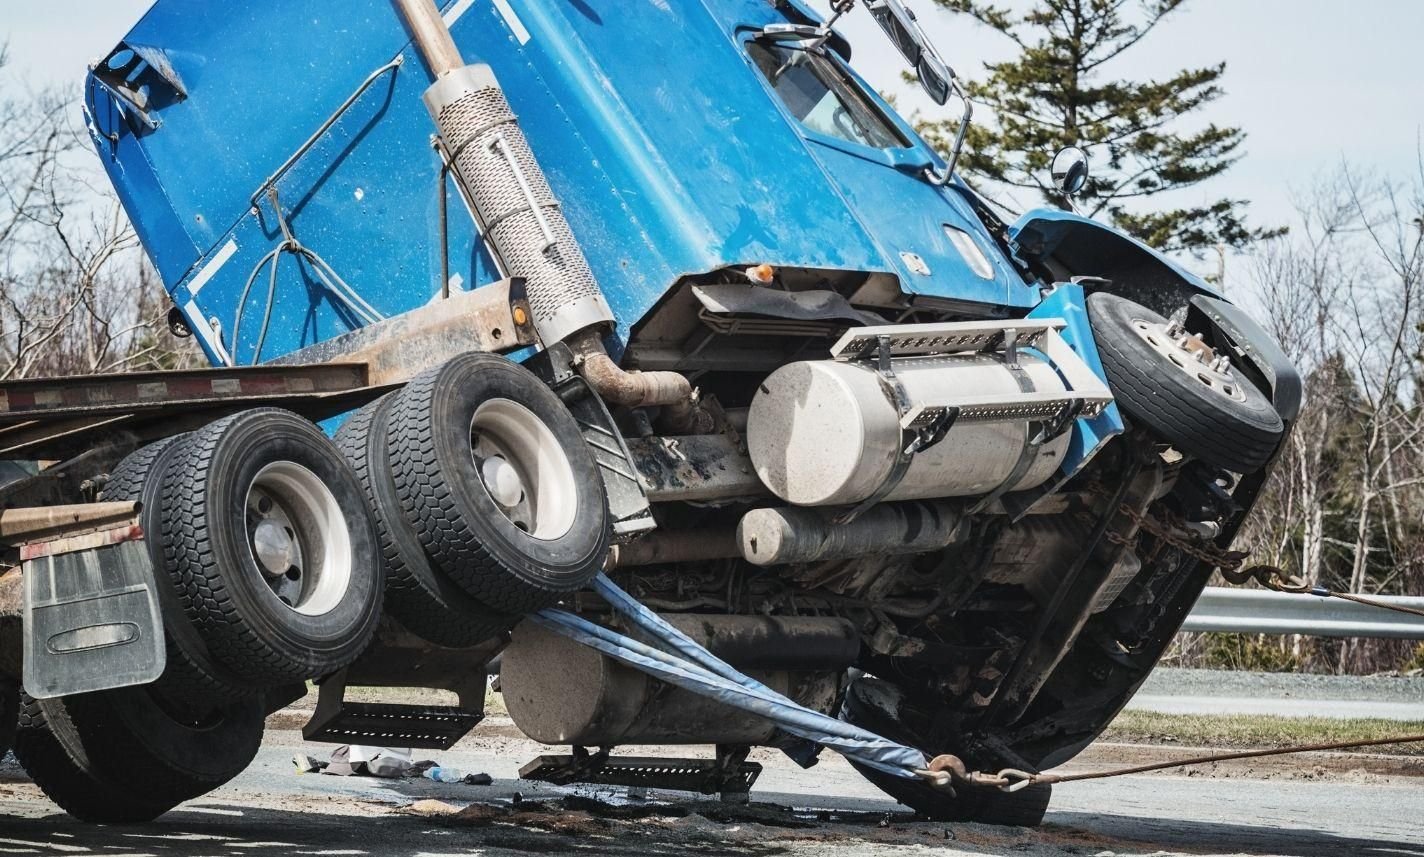 haralson-commercial-truck-accident-injury-lawyer